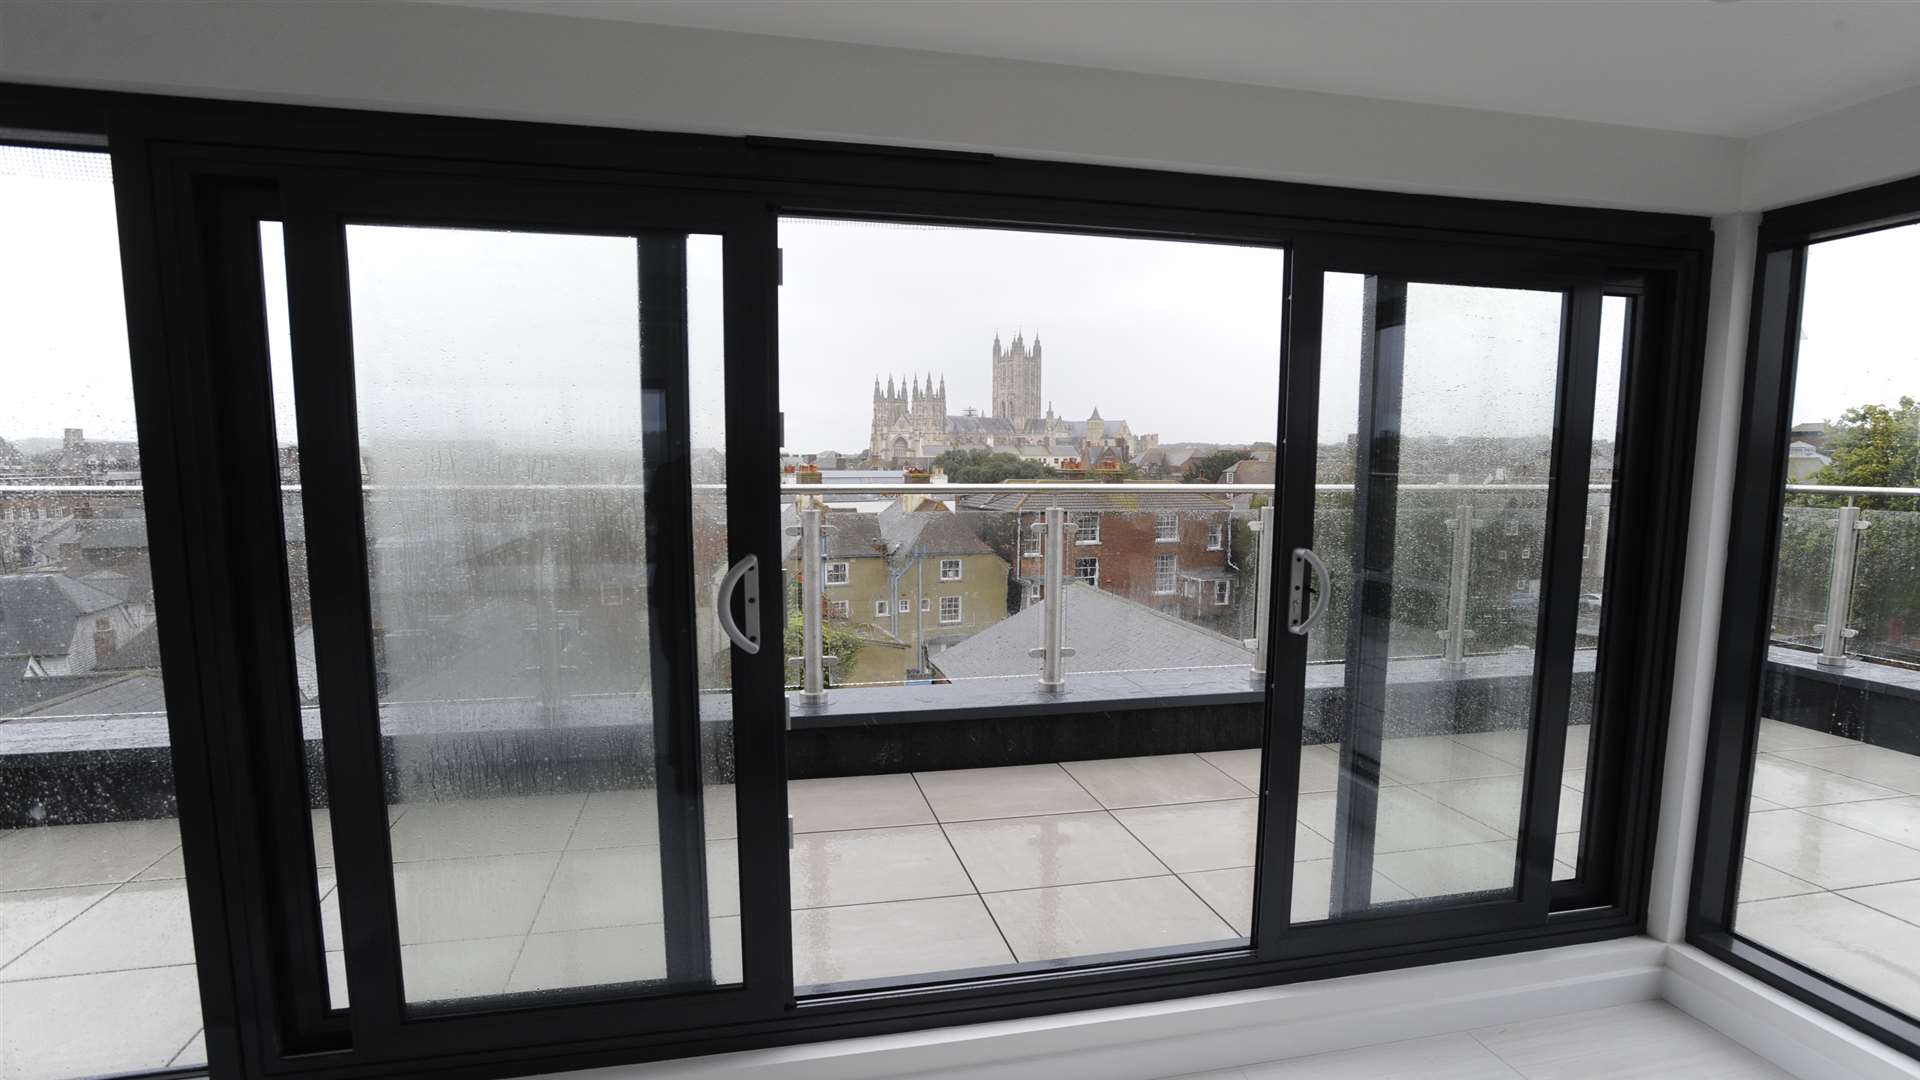 The apartment has panoramic views of the city